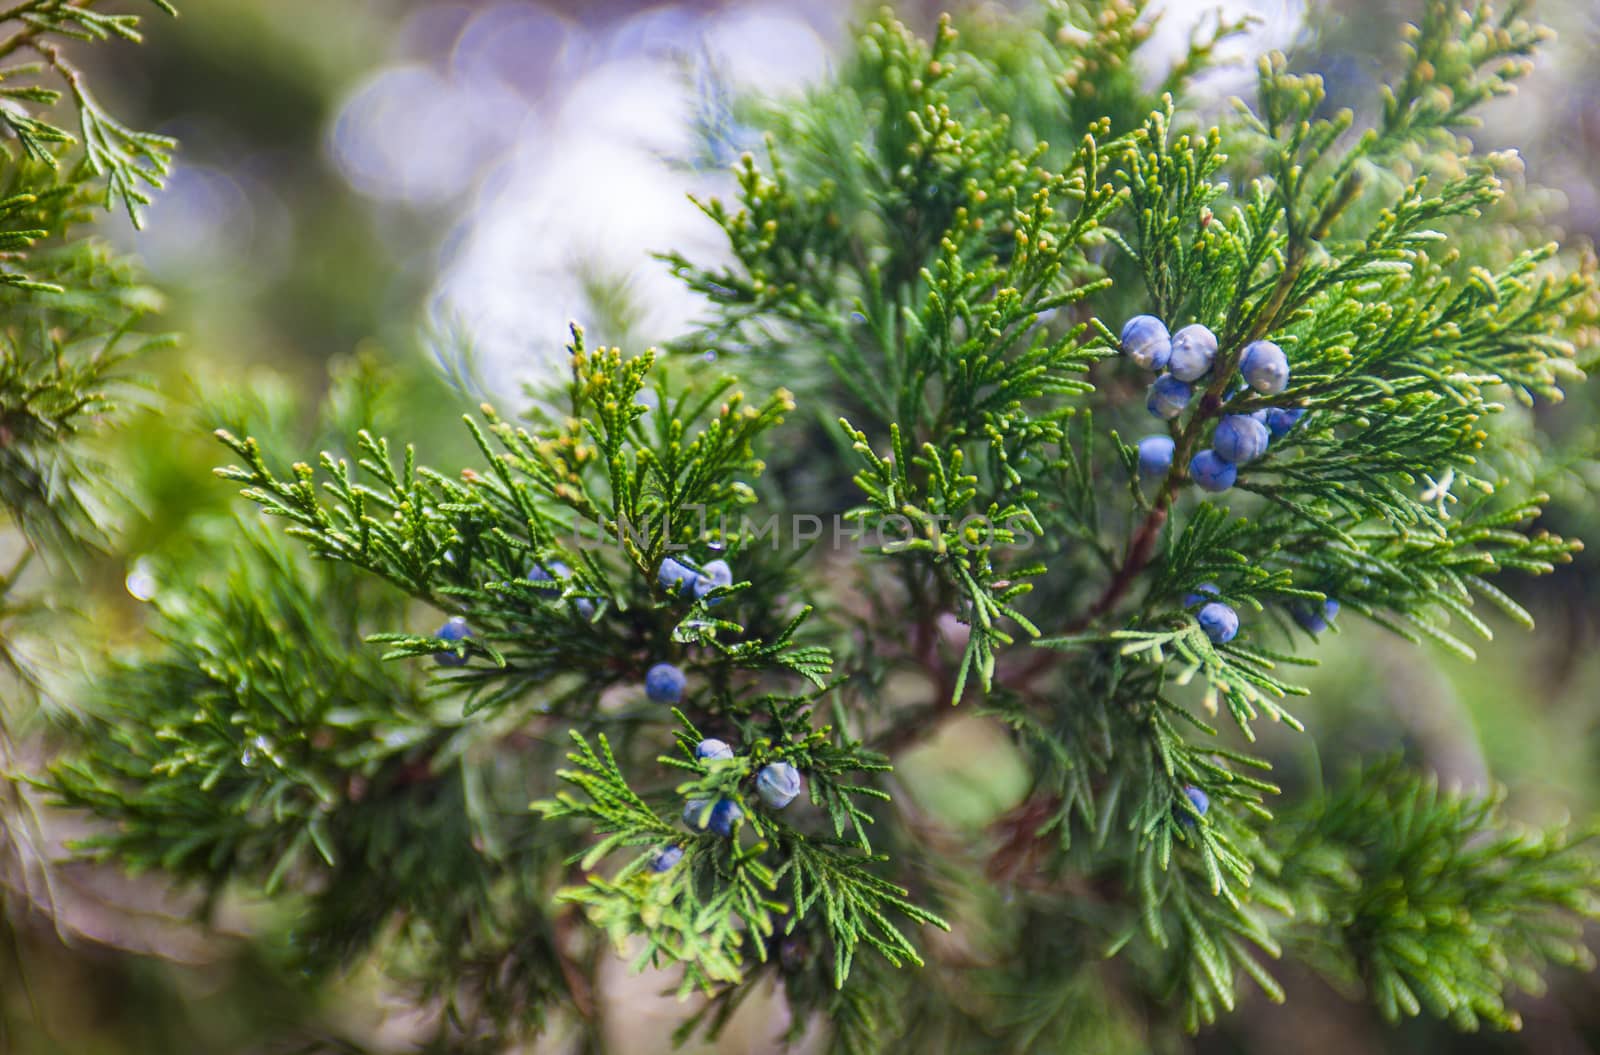 Juniper branch with blue female berry-like seed cones